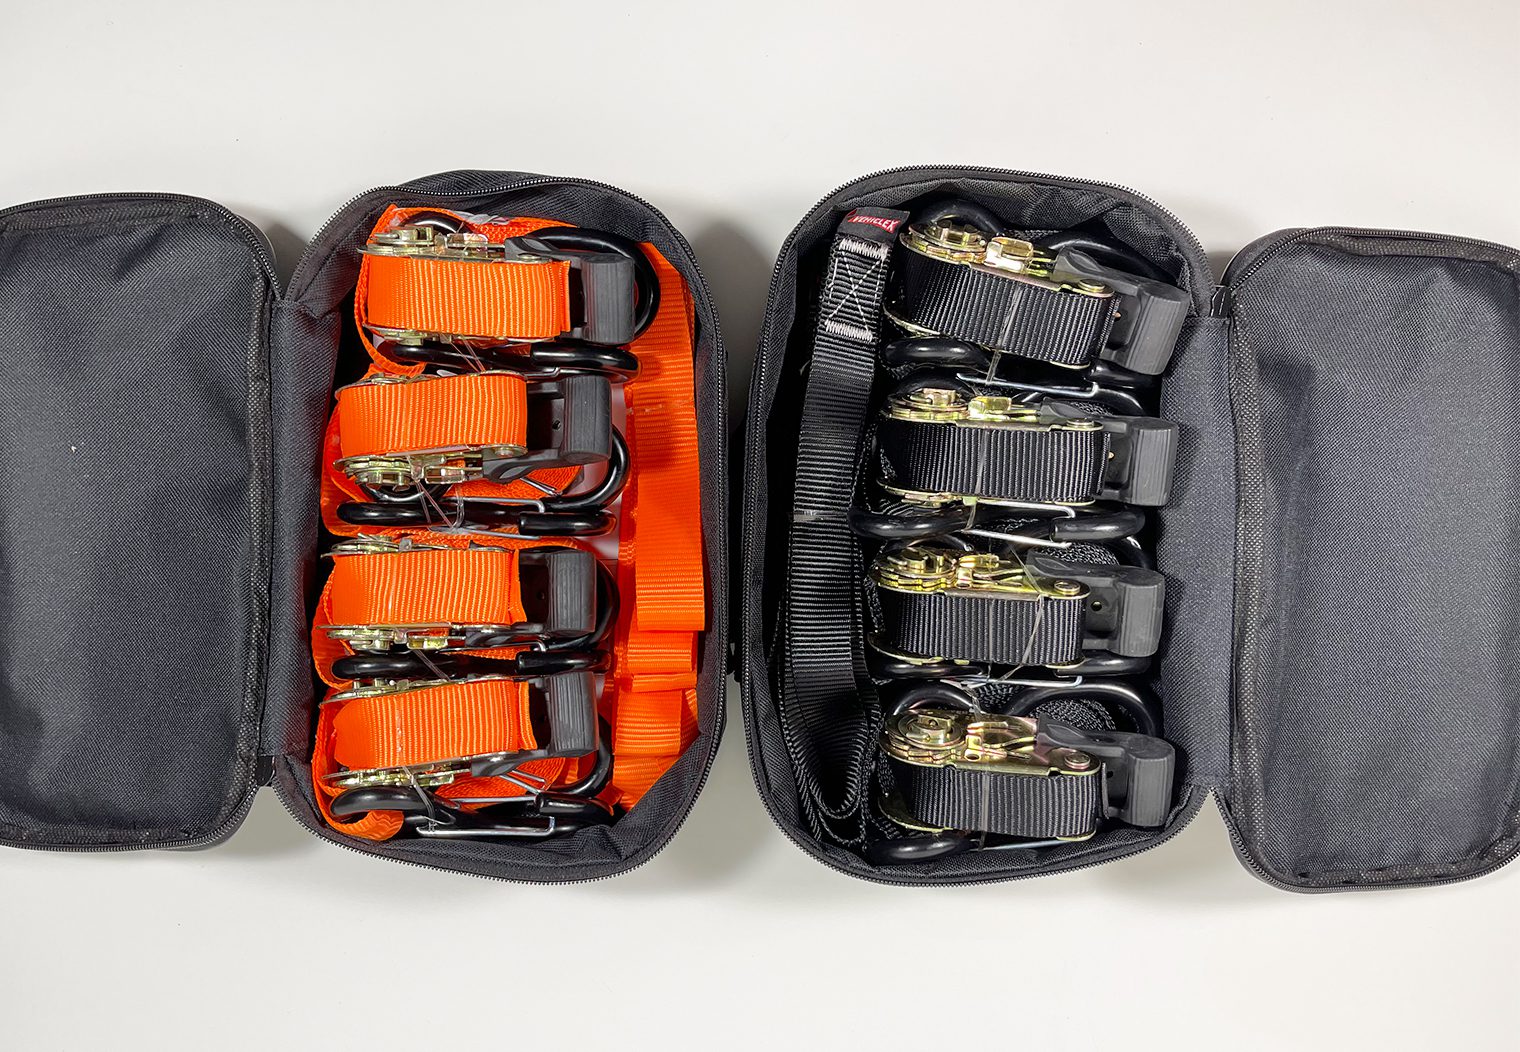 VehicleX Ratchet Tie-Downs in carrying case opened